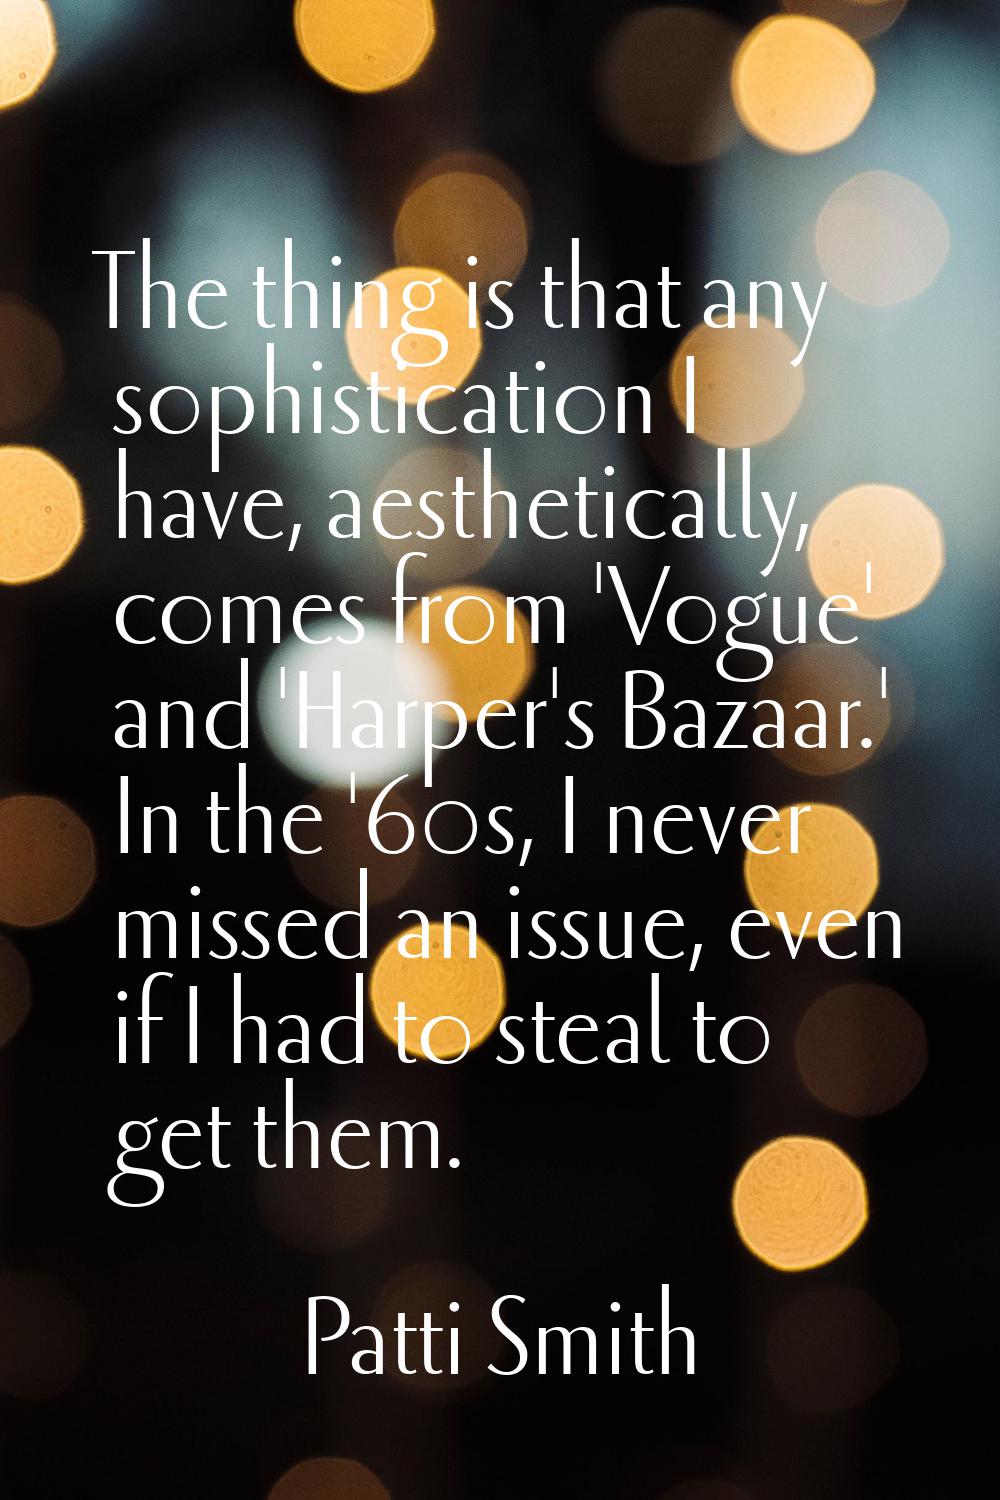 The thing is that any sophistication I have, aesthetically, comes from 'Vogue' and 'Harper's Bazaar